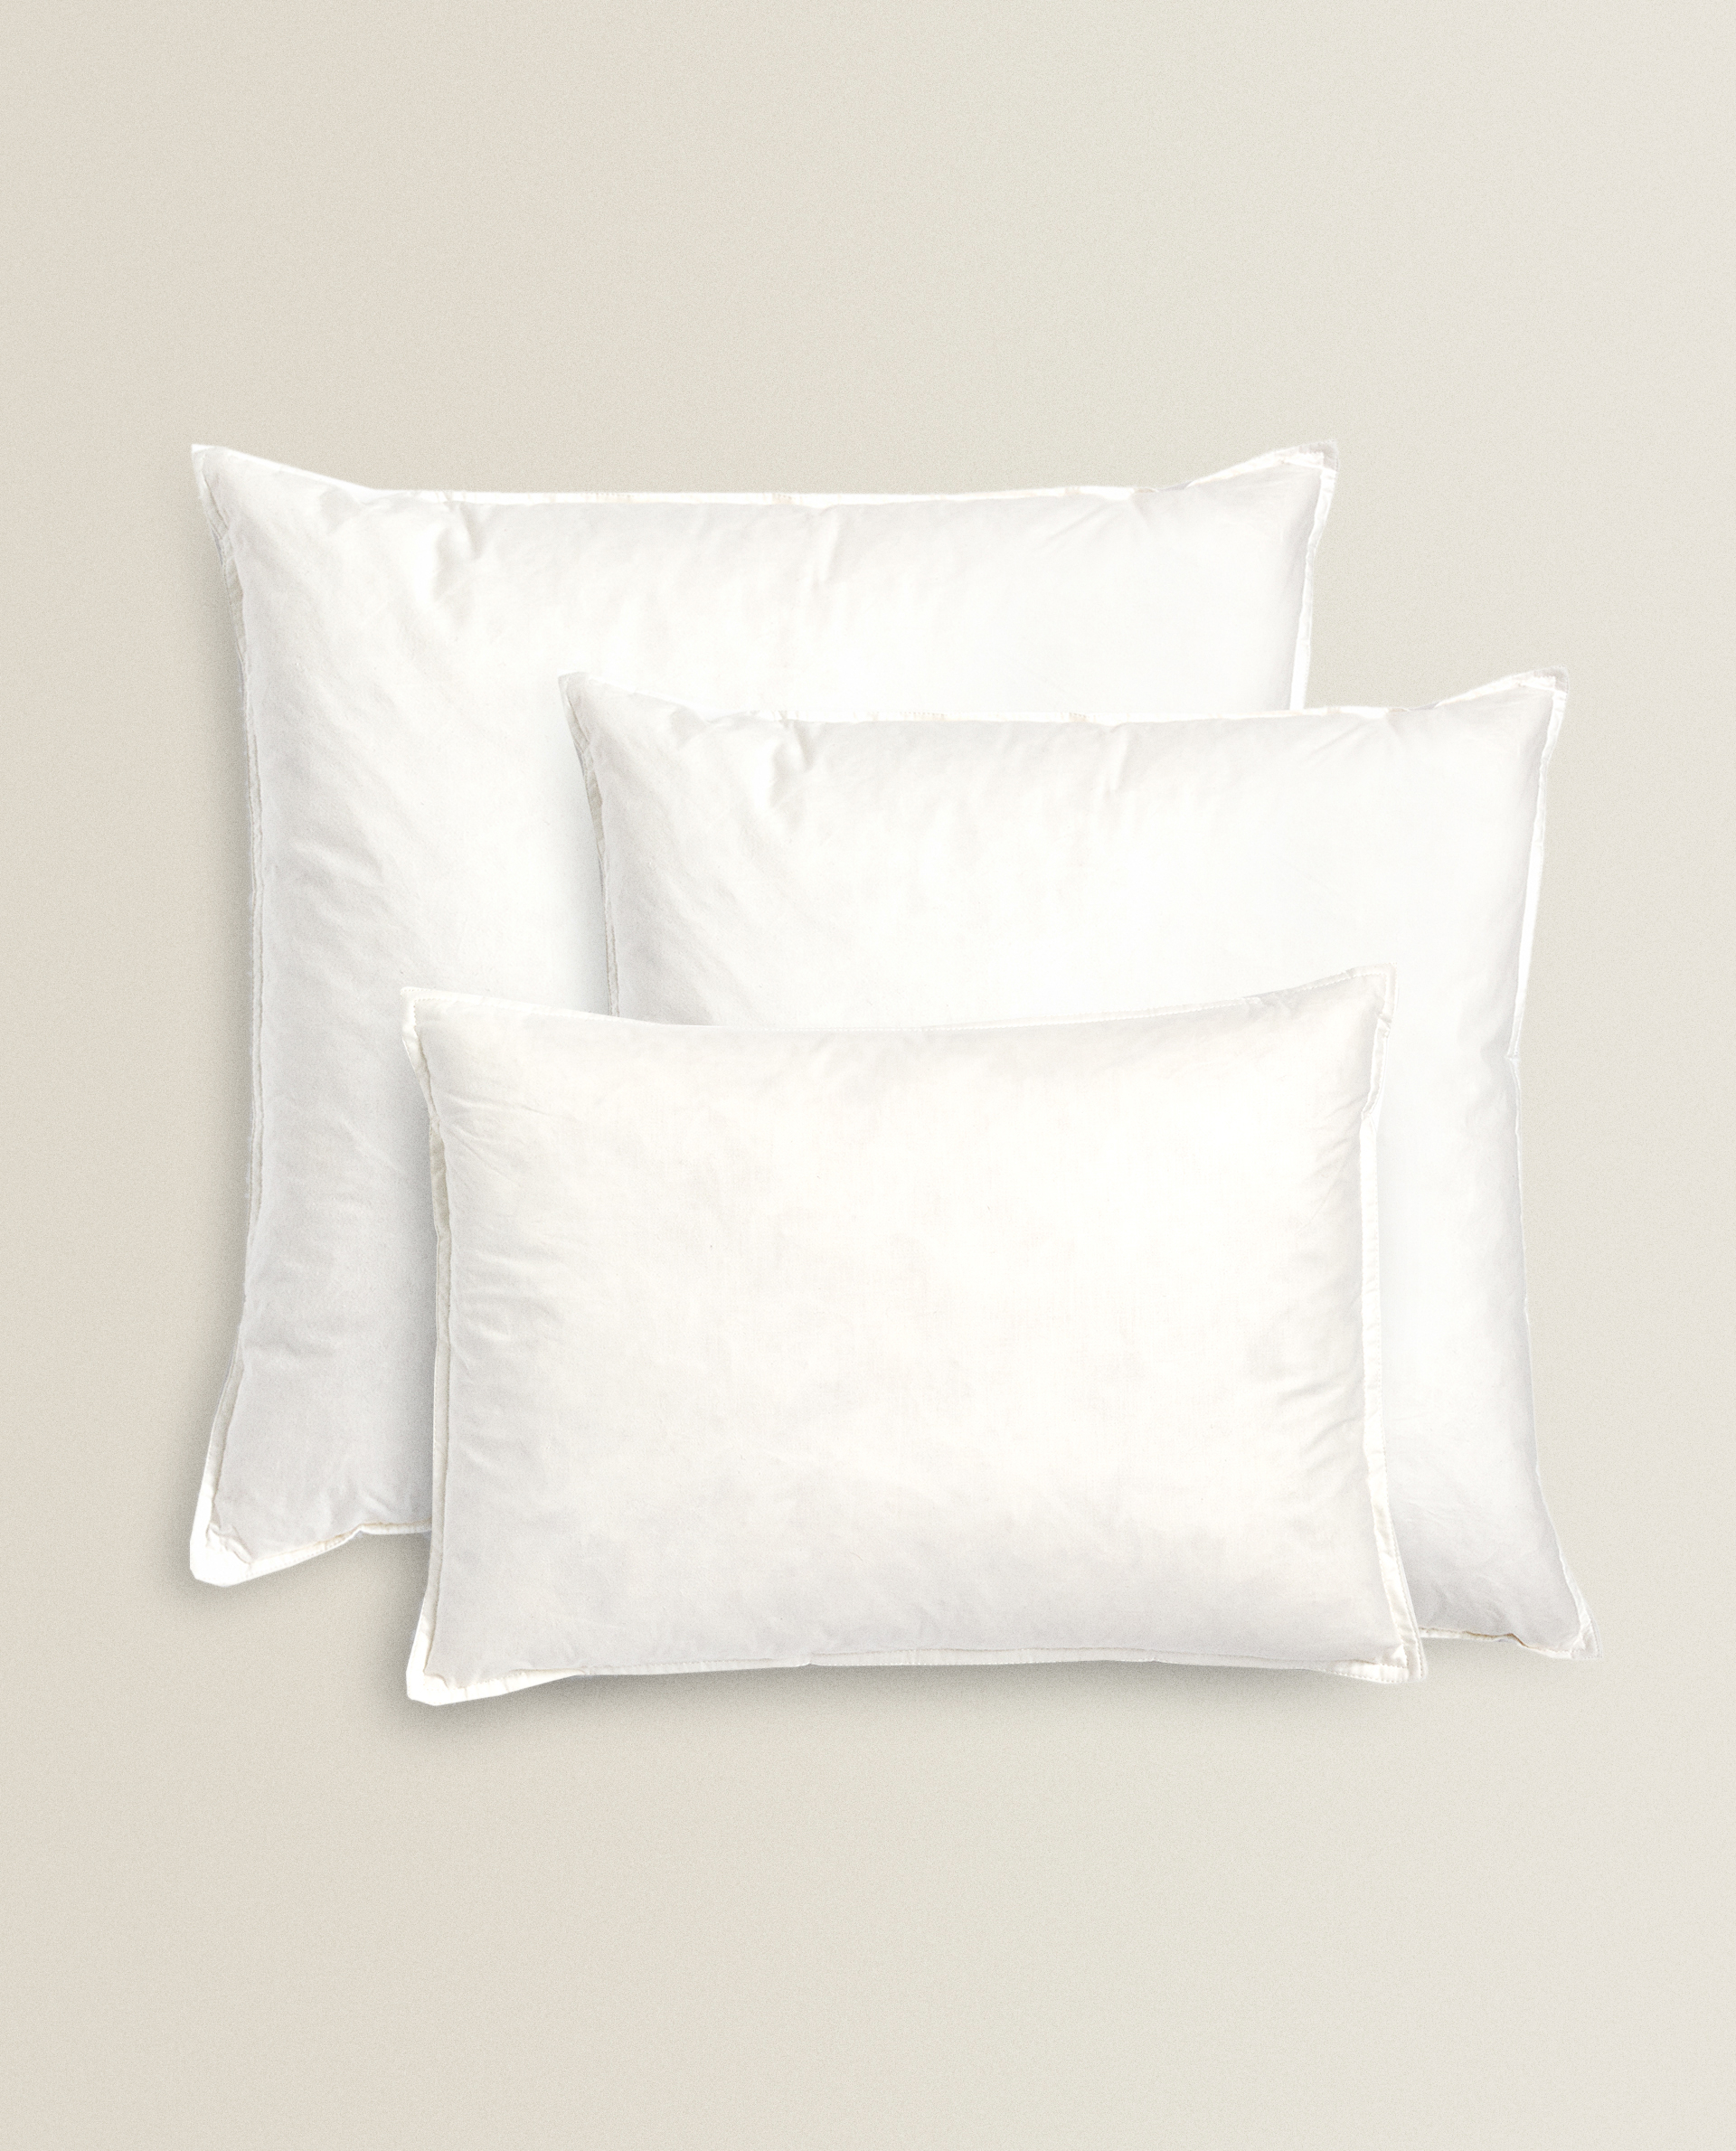 FEATHER PILLOW FILLING WITH COTTON COVER - White